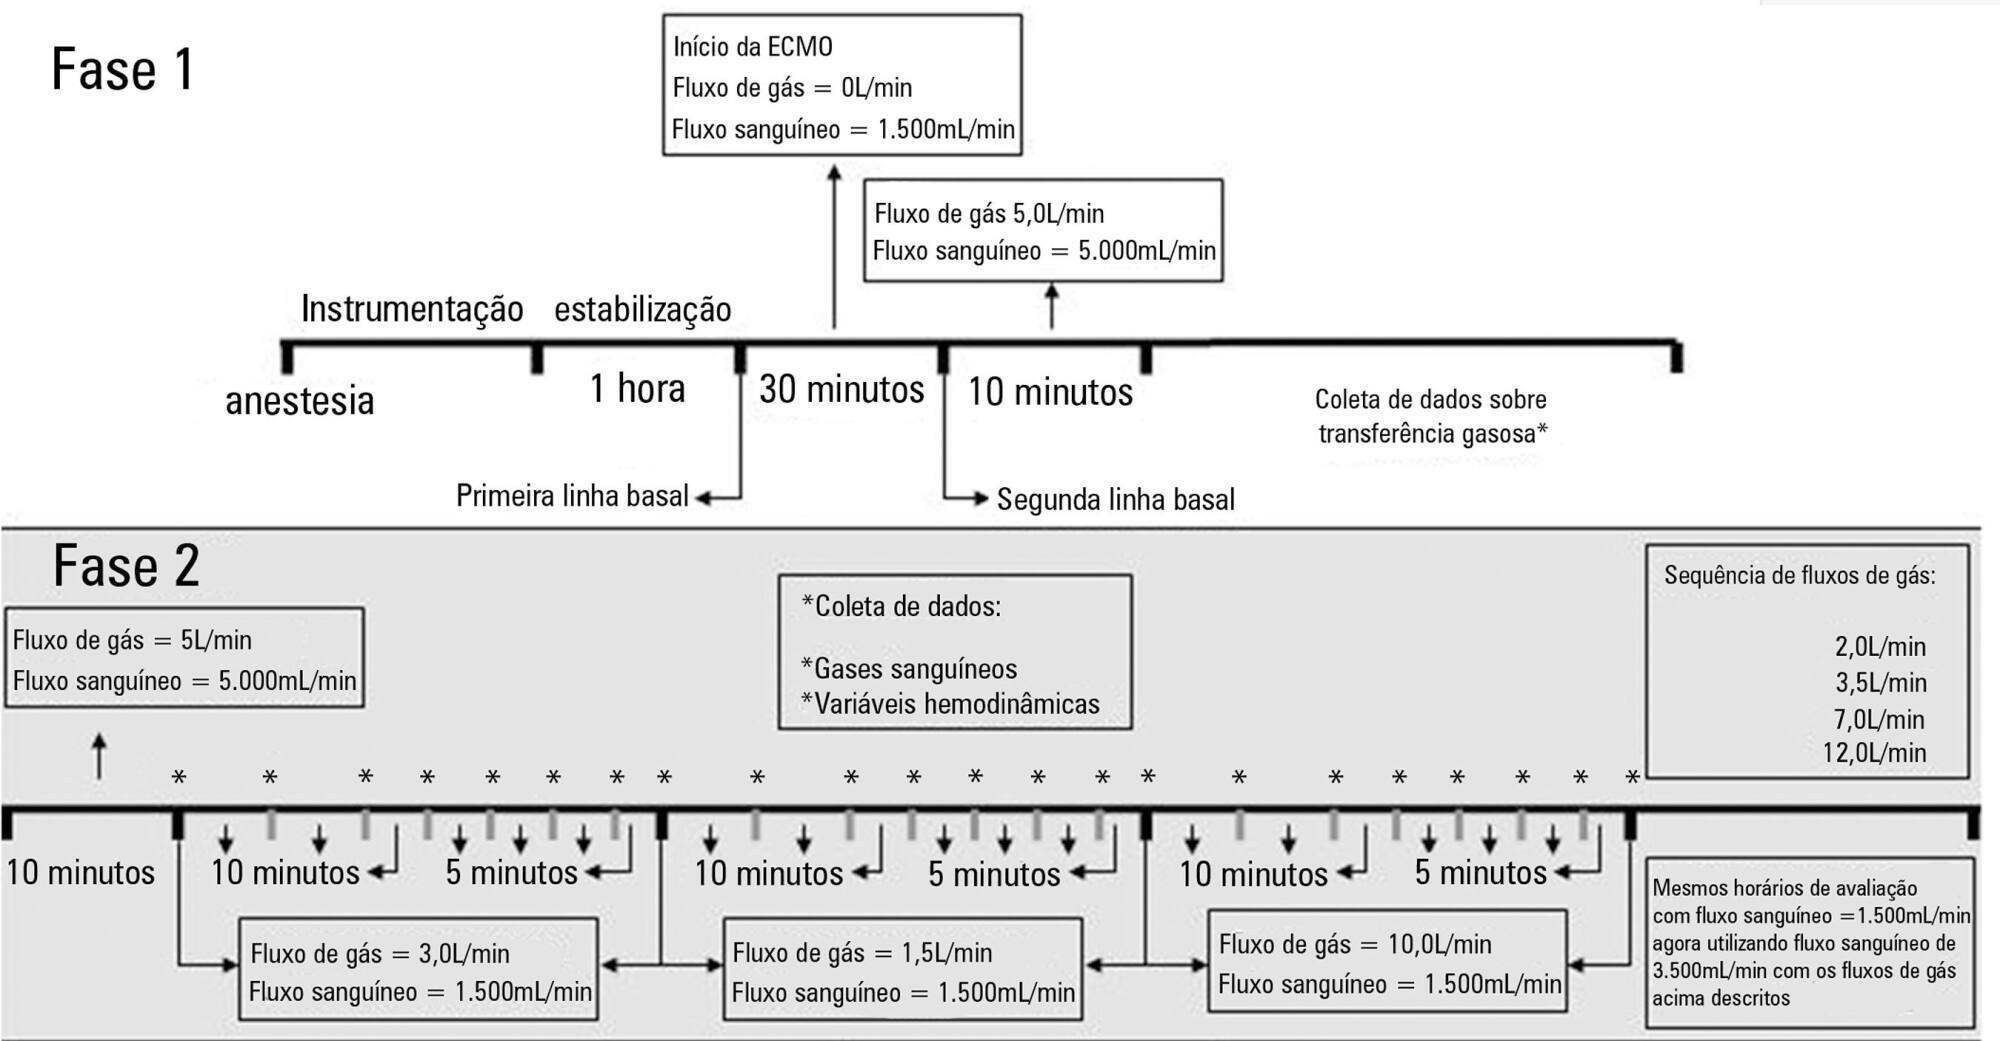 Factors associated with blood oxygen partial pressure and carbon dioxide partial pressure regulation during respiratory extracorporeal membrane oxygenation support: data from a swine model